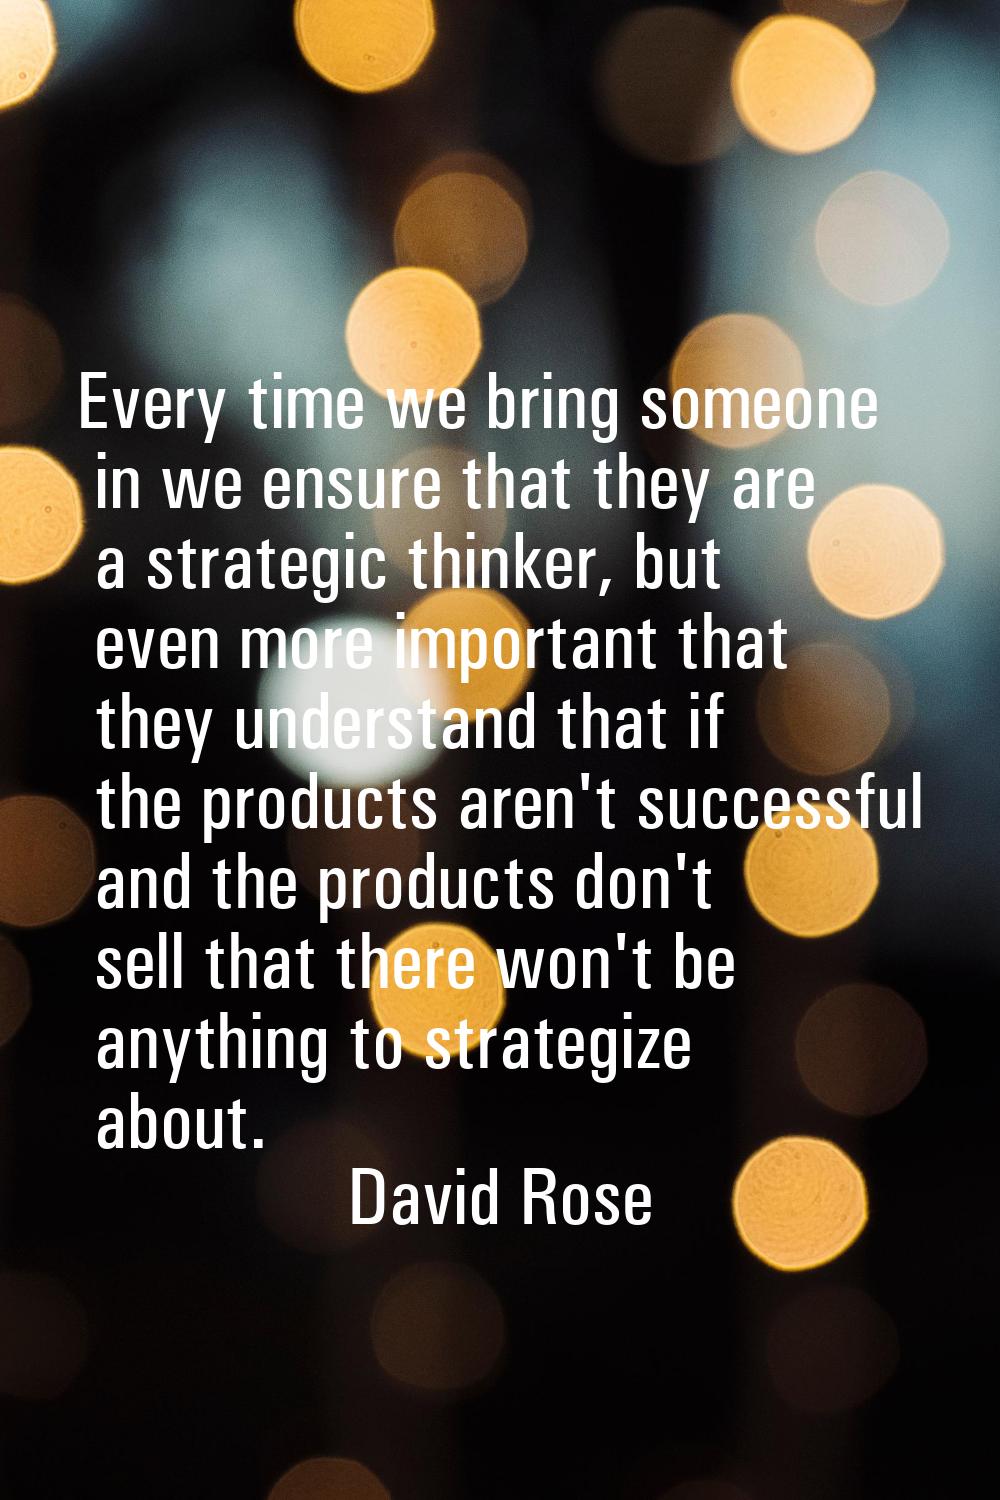 Every time we bring someone in we ensure that they are a strategic thinker, but even more important